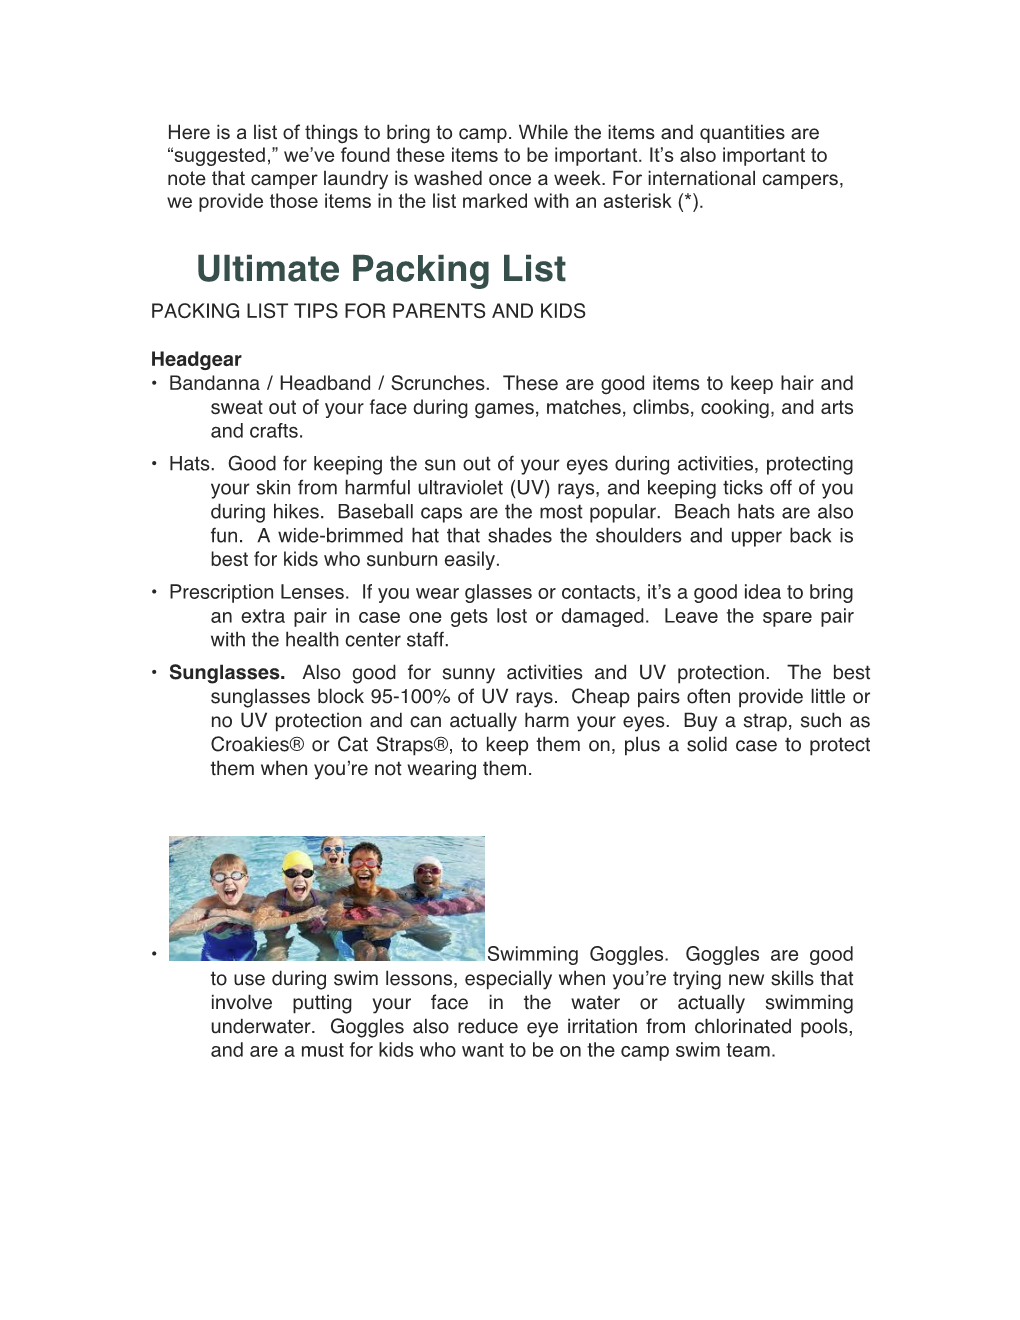 Ultimate Packing List PACKING LIST TIPS for PARENTS and KIDS